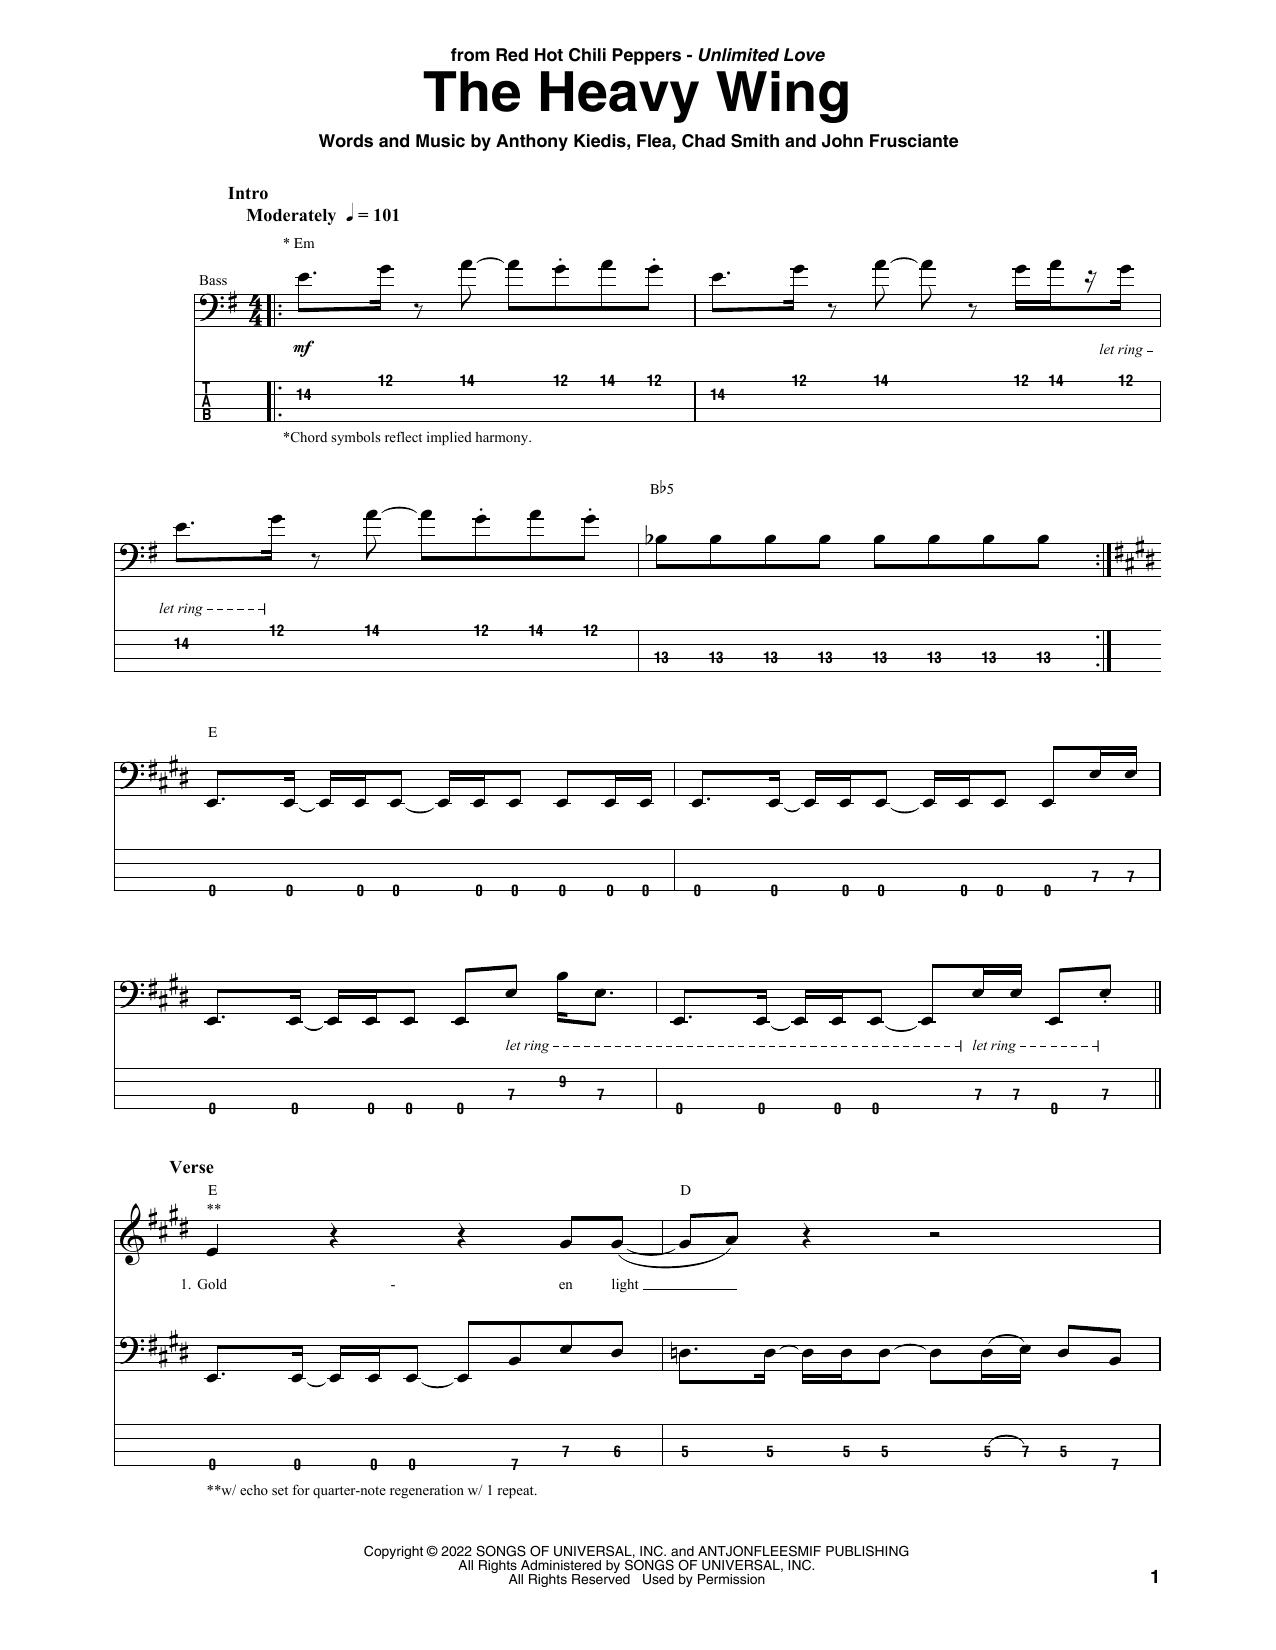 Download Red Hot Chili Peppers The Heavy Wing Sheet Music